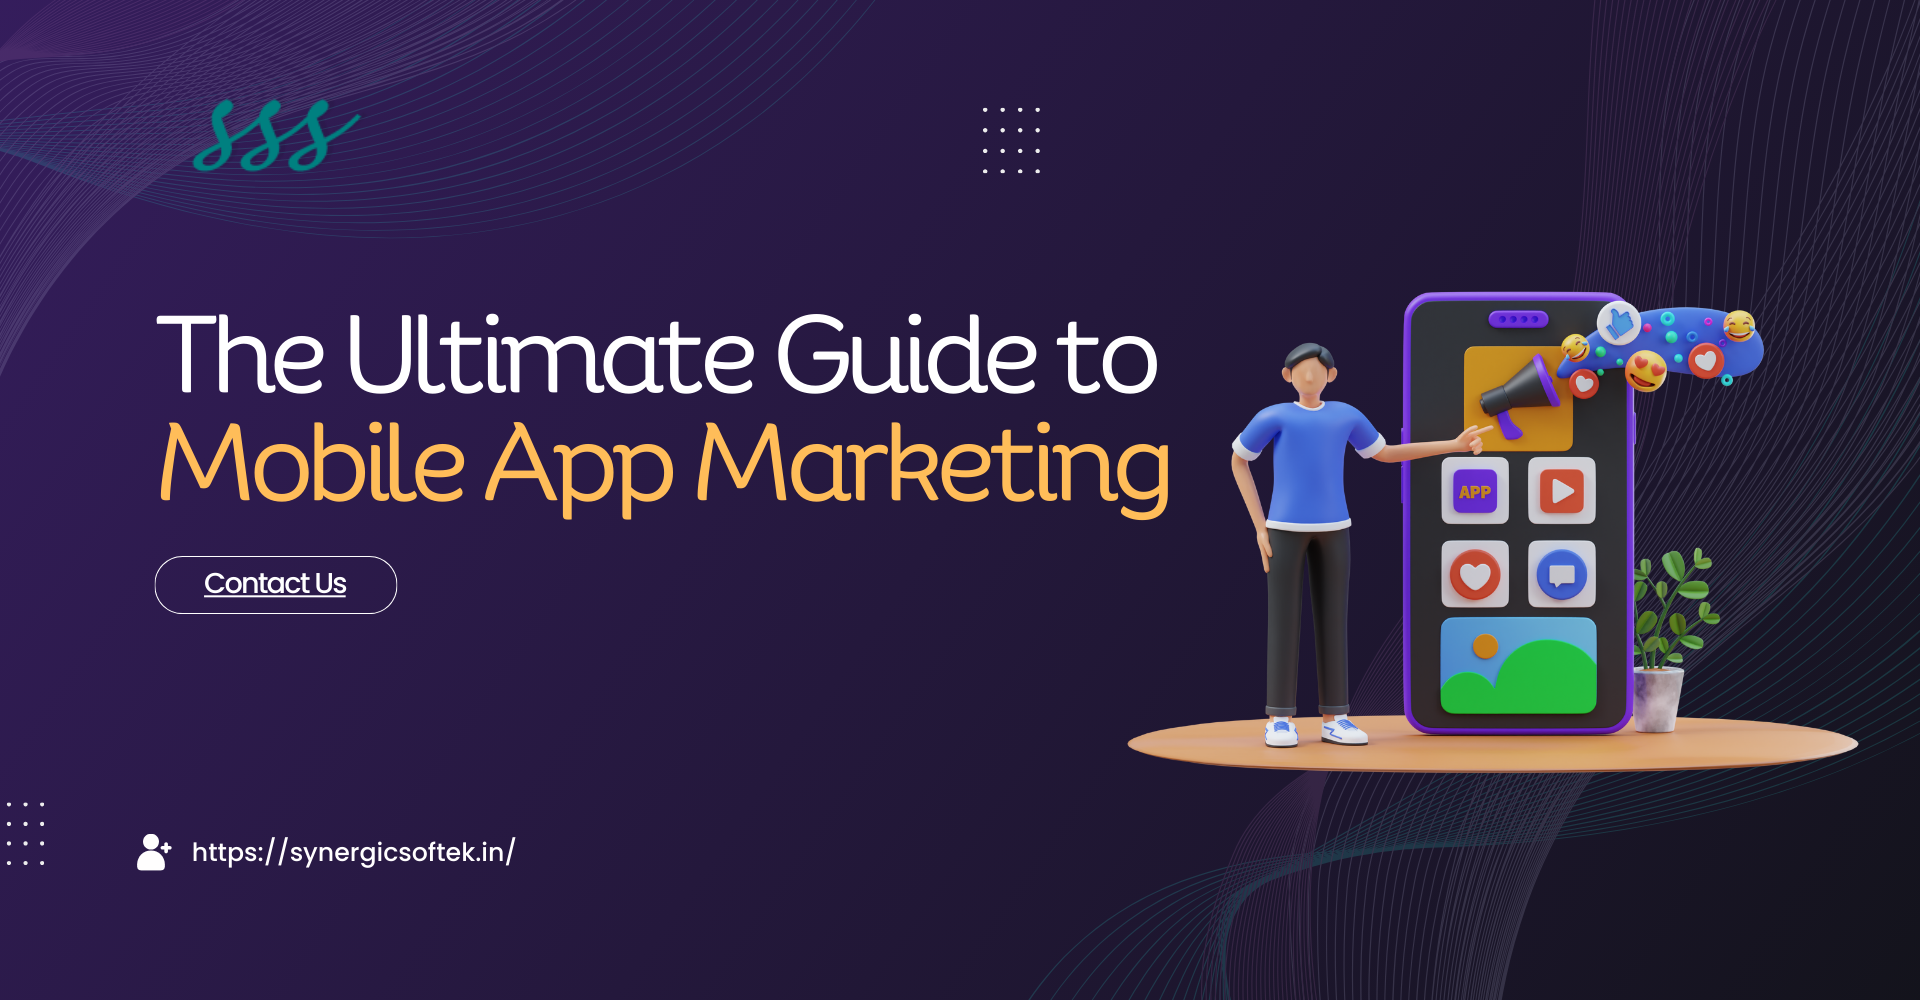 The Ultimate Guide to Mobile App Marketing